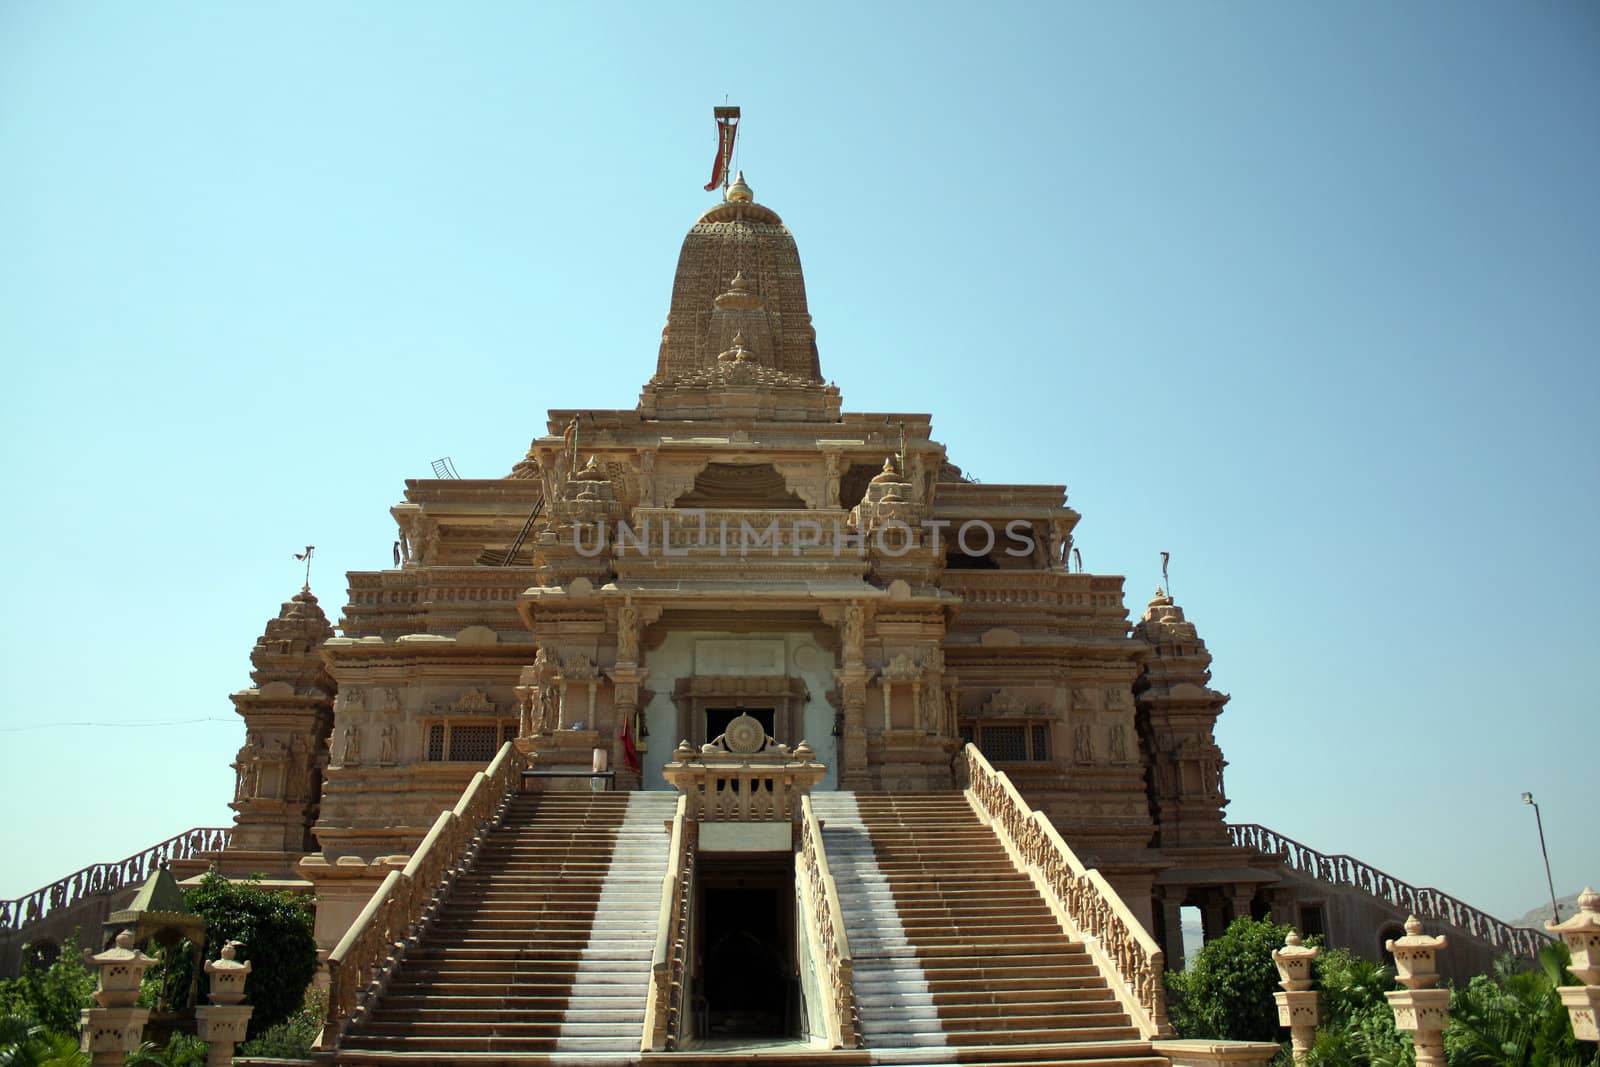 A beautiful marble temple of the Jain religion on a hilltop, in India.